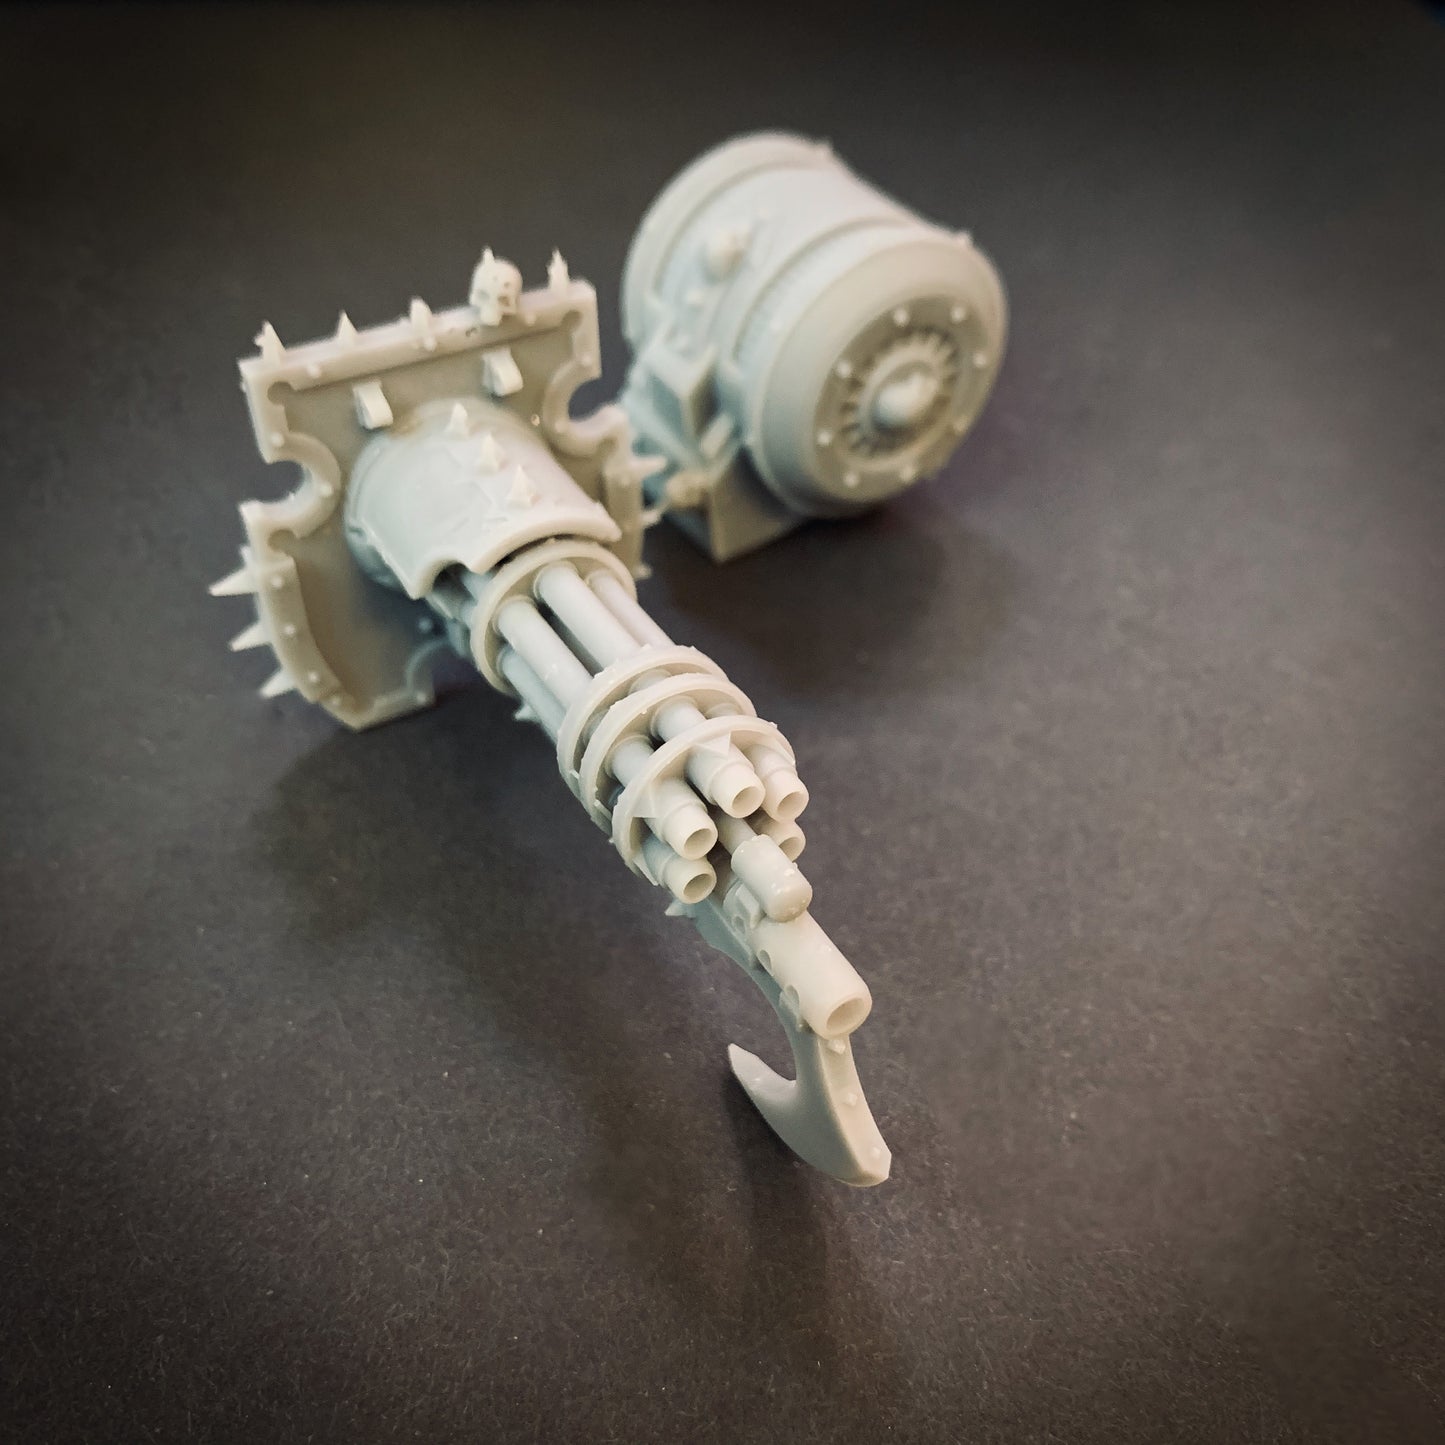 Chaotic Warmachine Gatling Cannon STL File Download